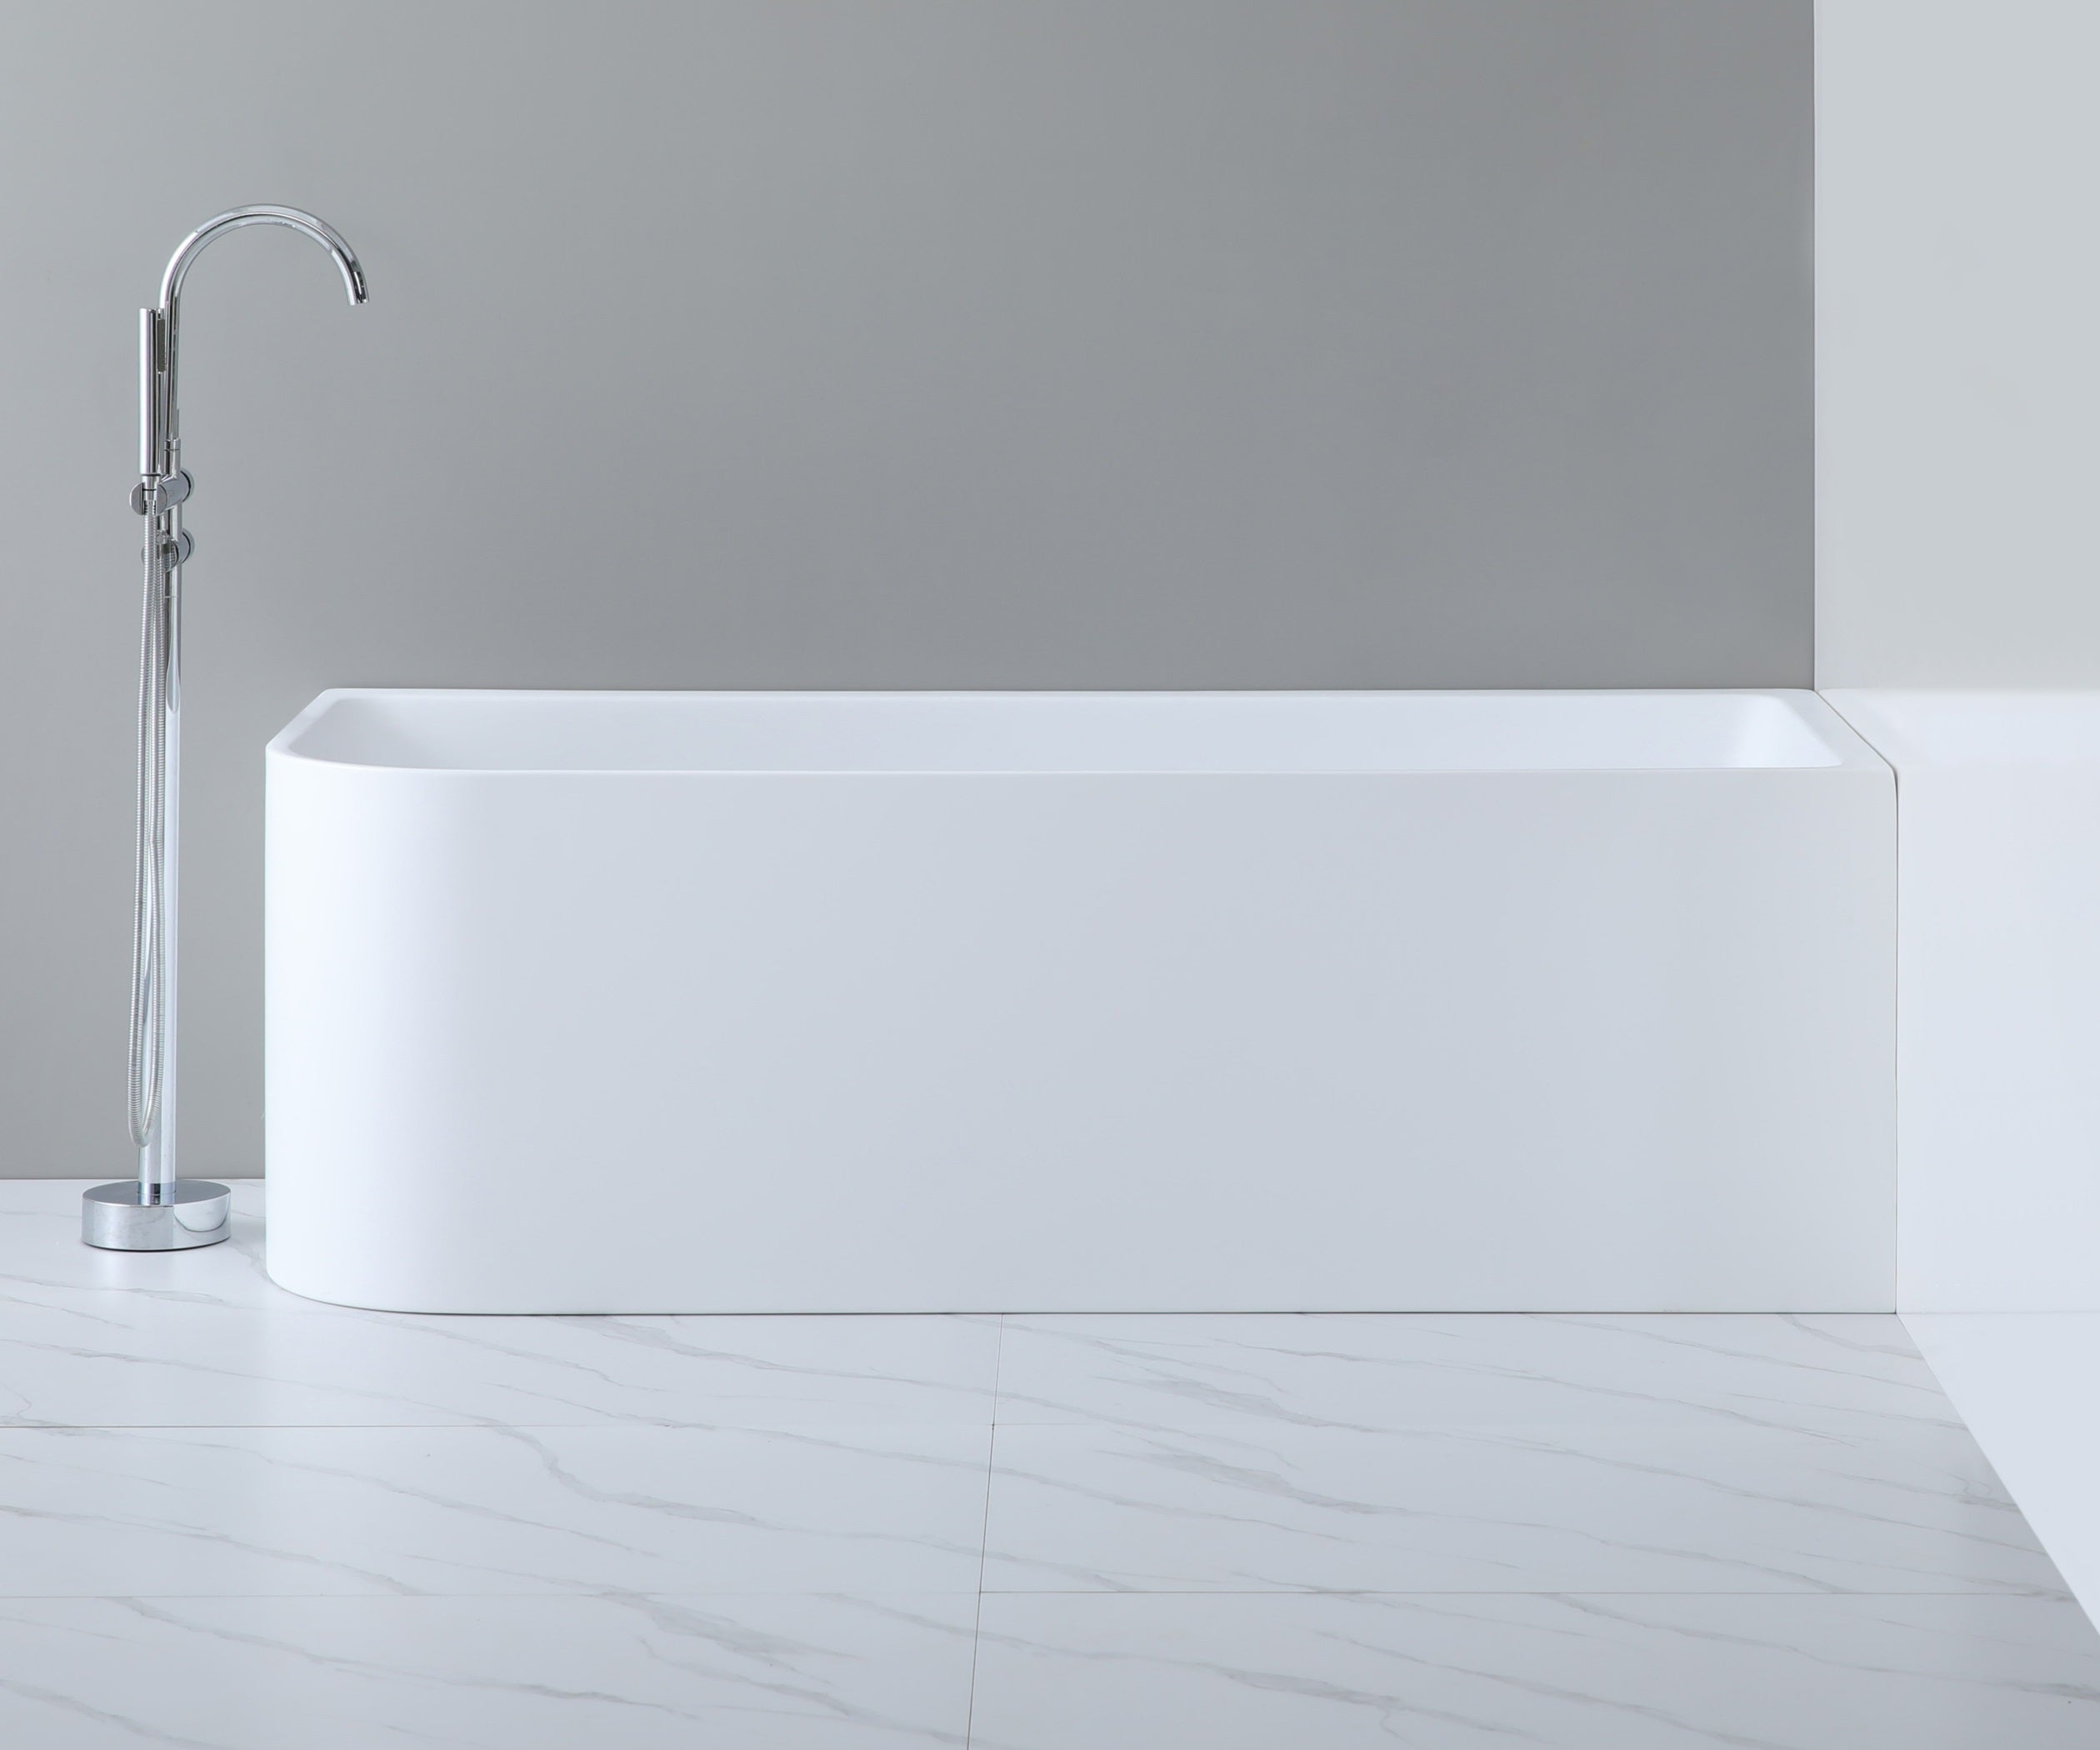 POSEIDON GLOSS WHITE RIGHT CORNER MULTI-FIT BATHTUB 580MM (AVAILABLE IN 1400MM, 1500MM AND 1700MM)